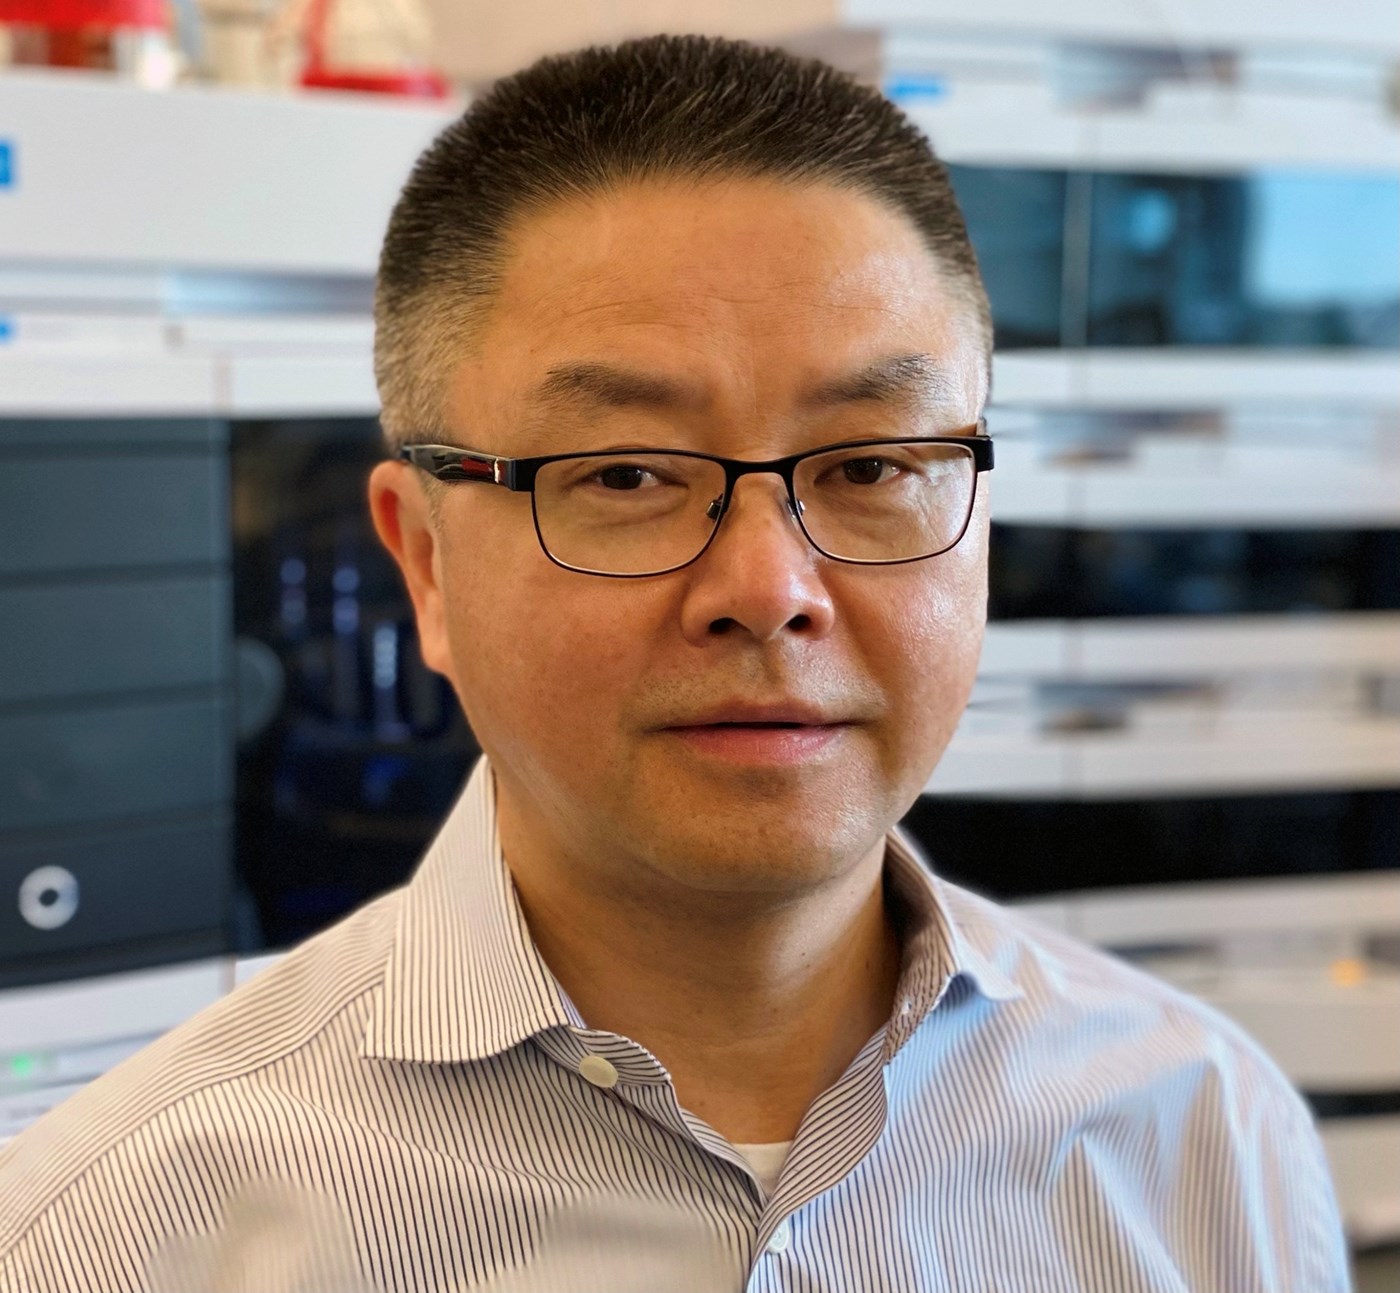 Jin Xu is a Professor in the Chemistry Department at UMass Lowell.